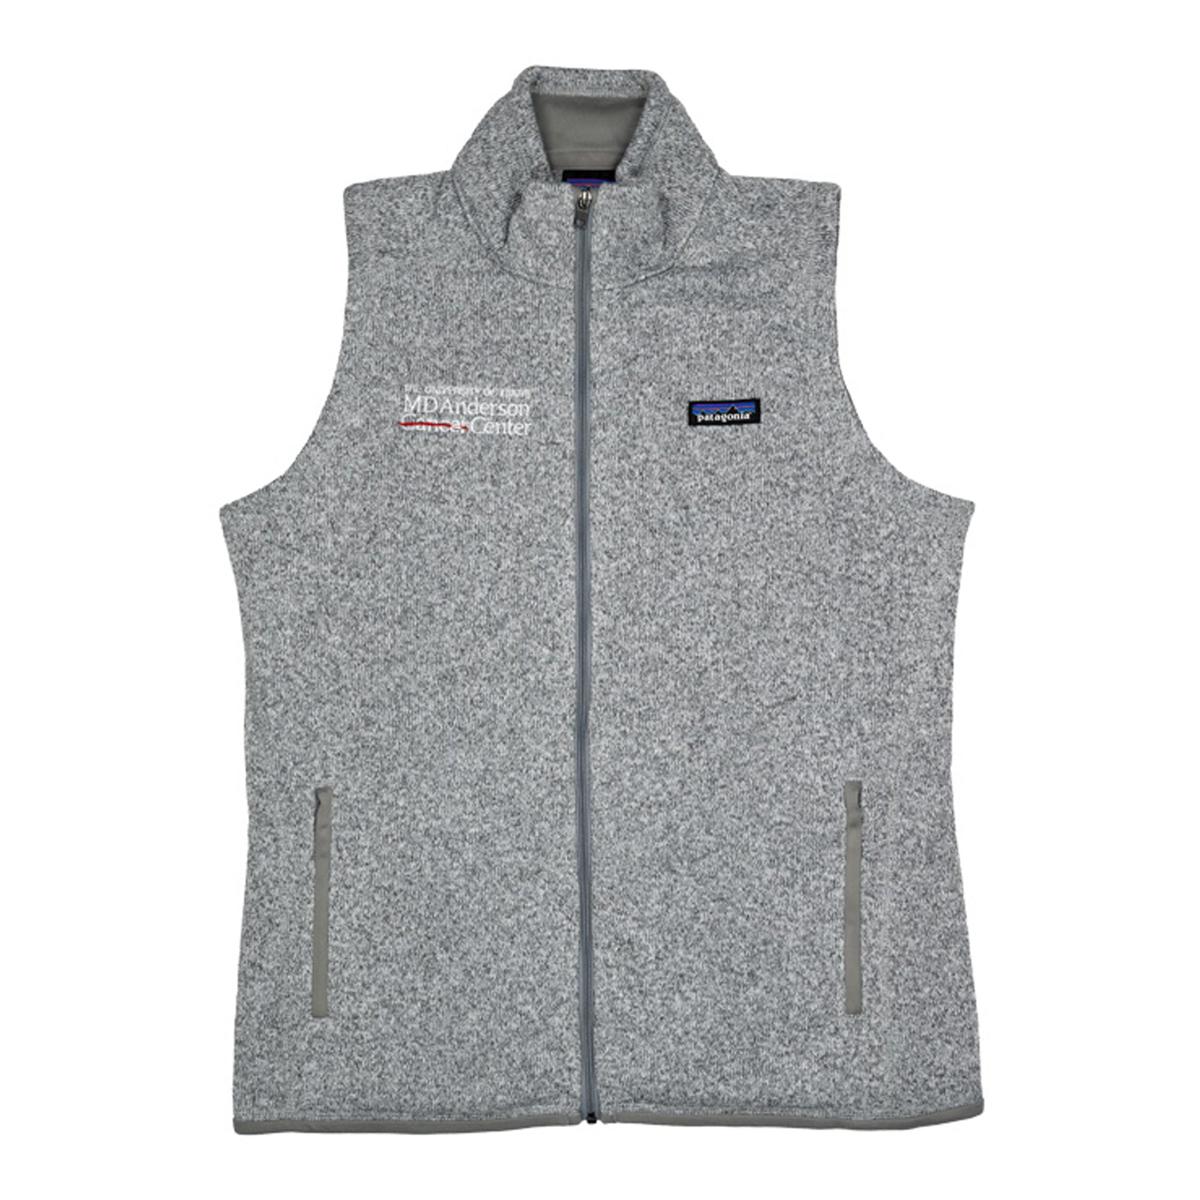 Grey Patagonia vest with the white MD Anderson logo on the chest area.